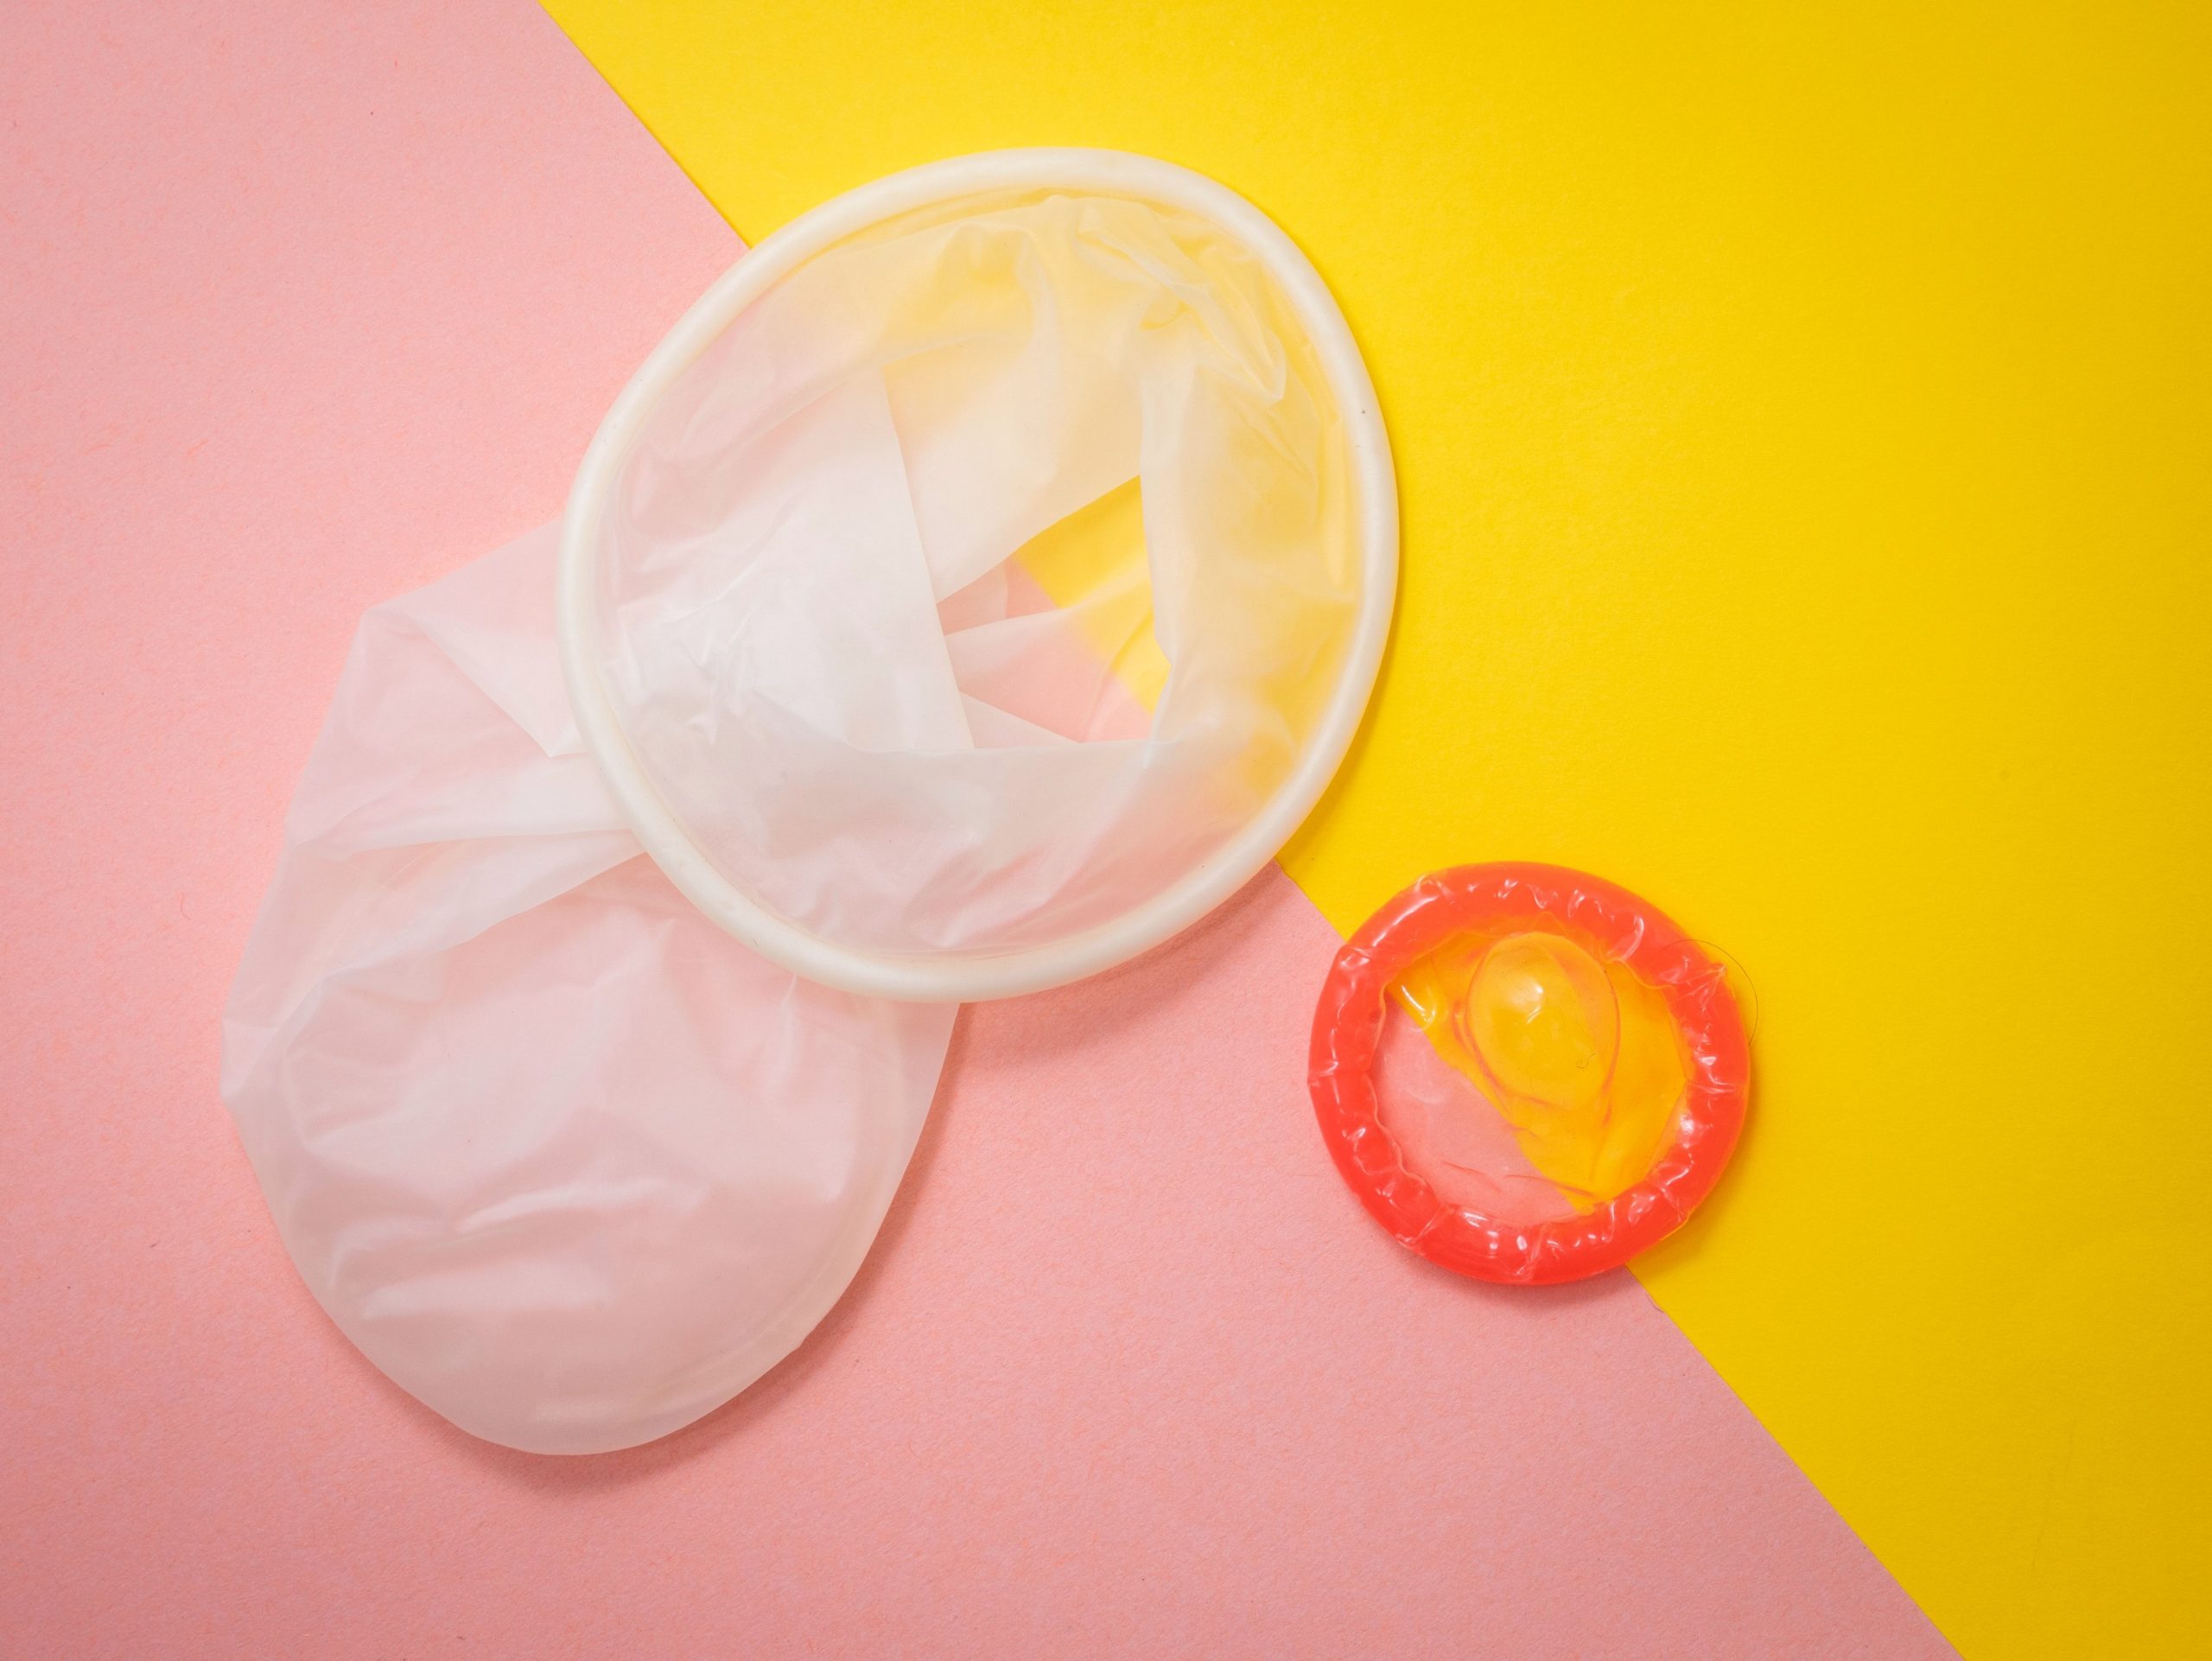 California outlaws removing condom without consent during intercourse